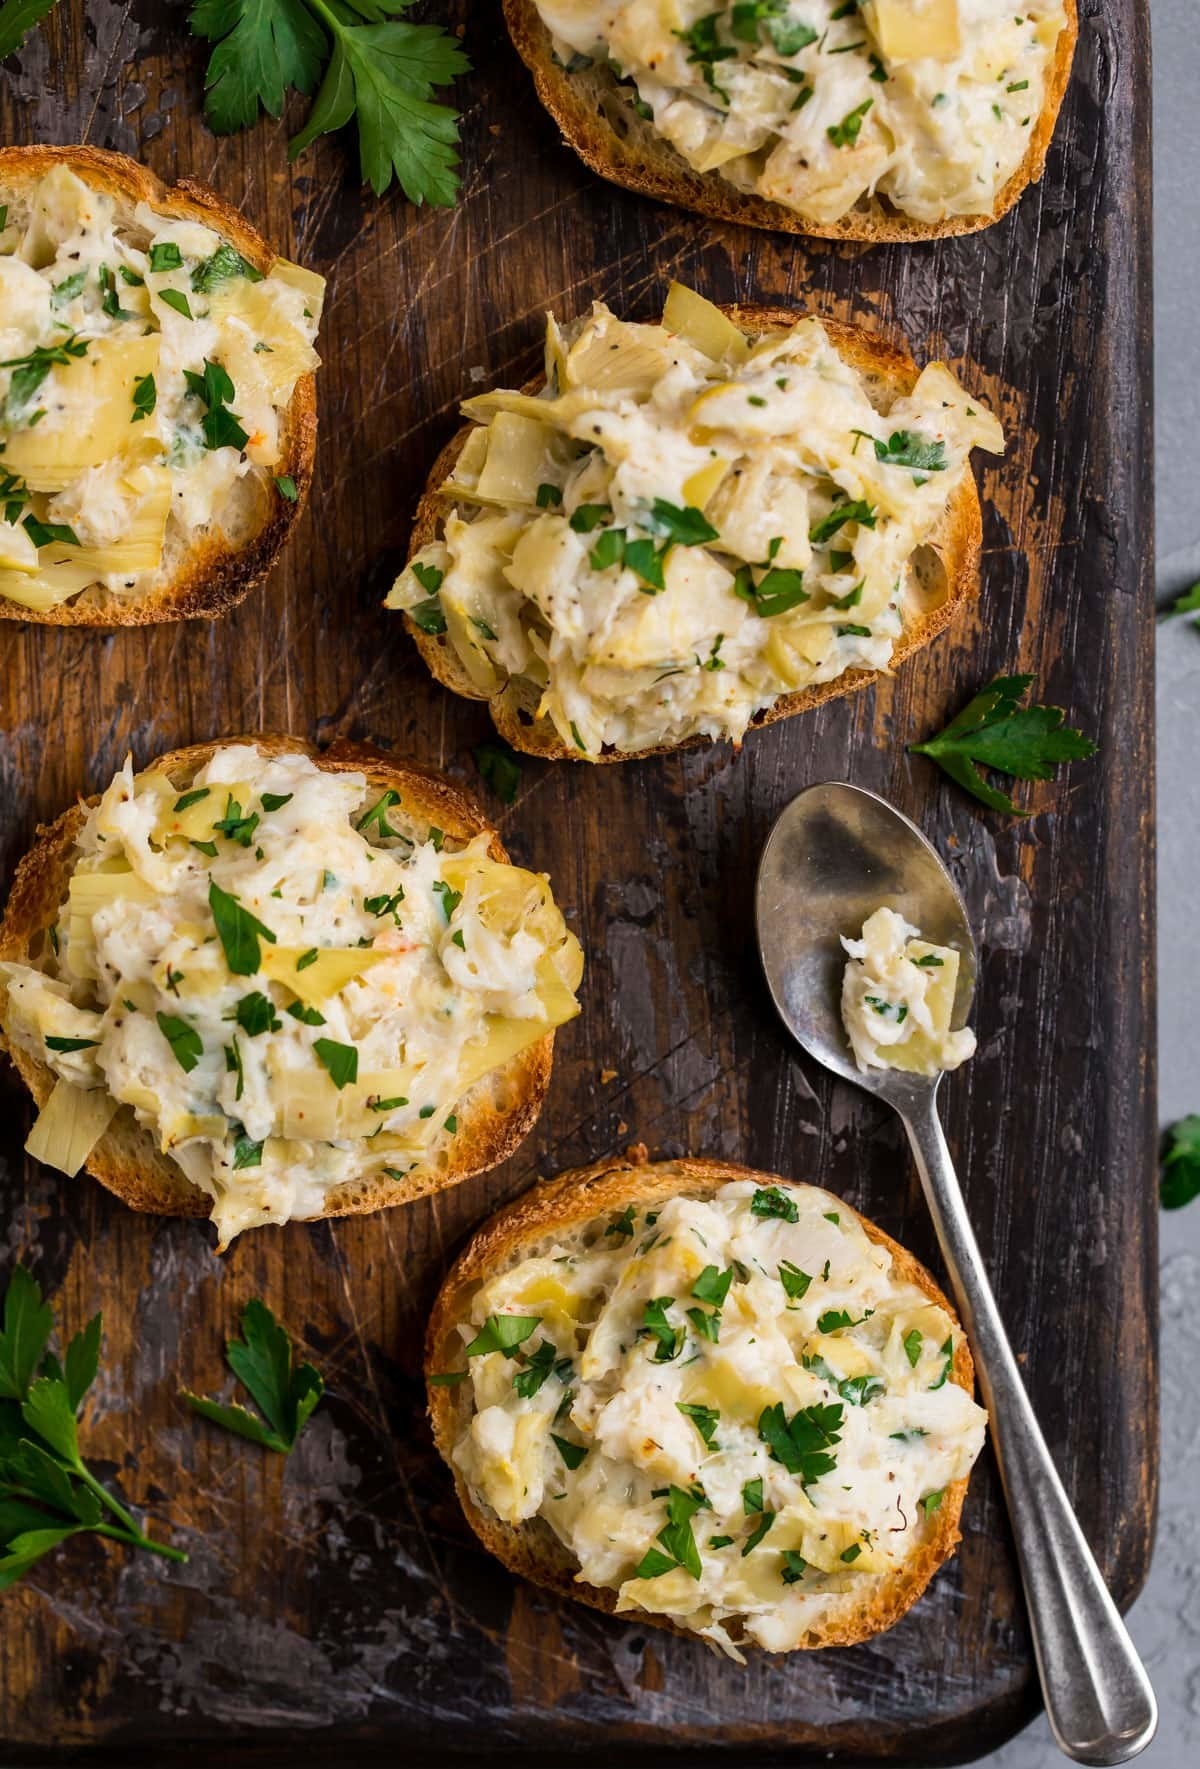 Crab and artichoke toasts